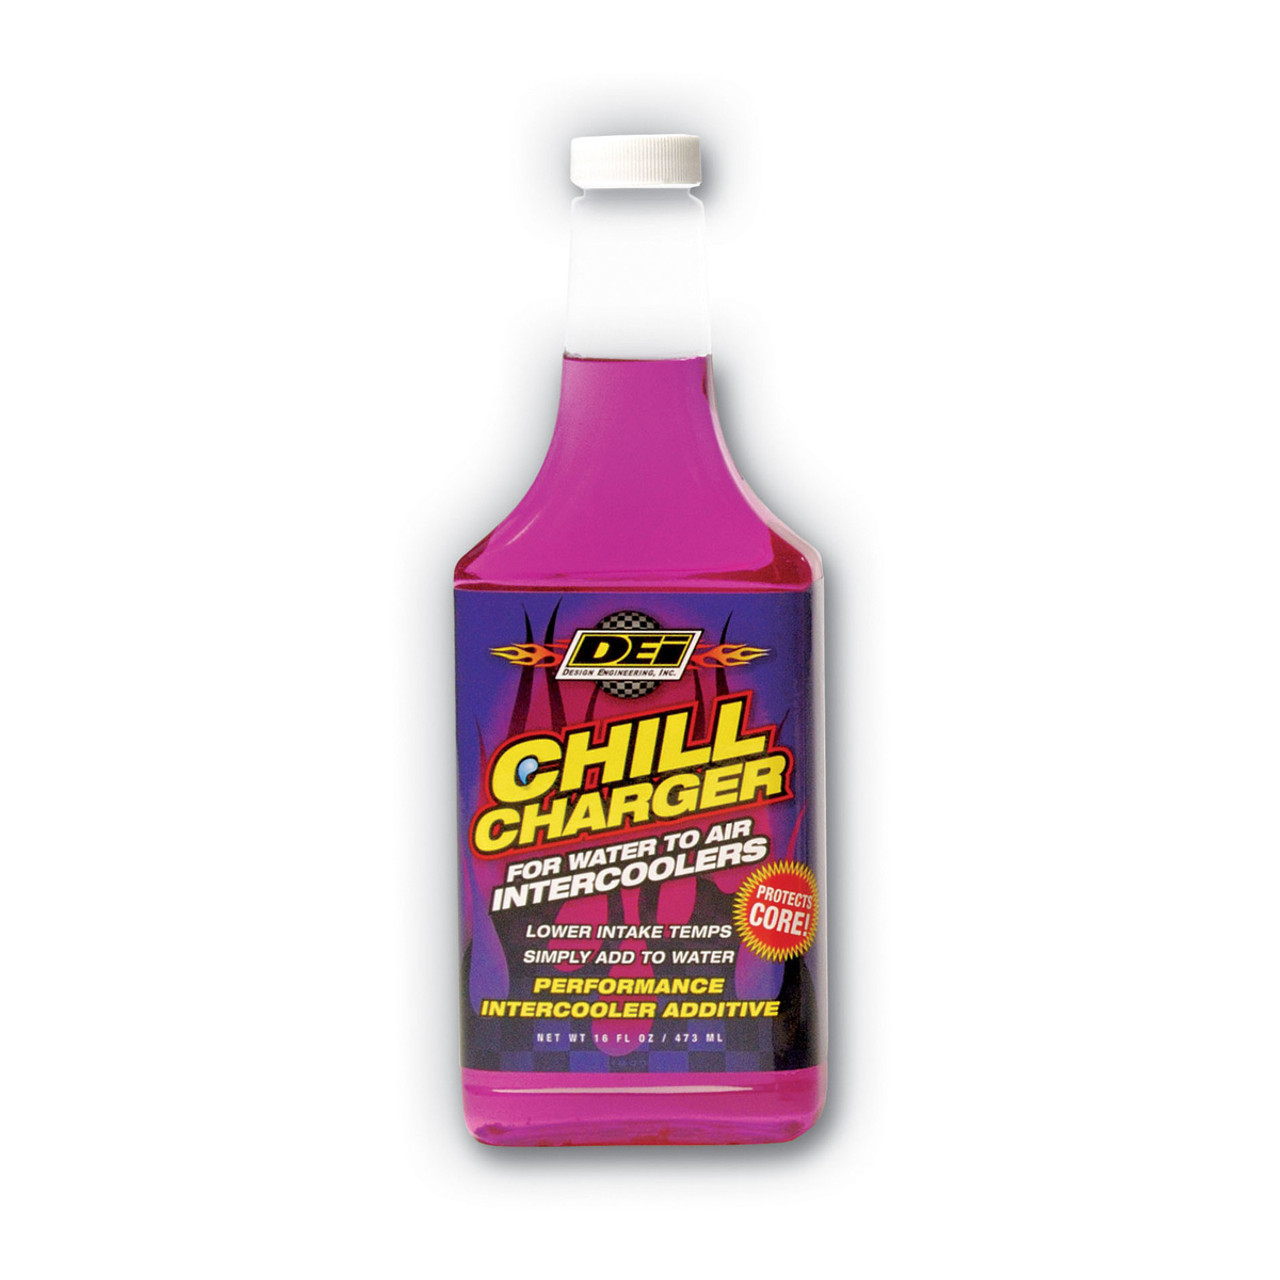 Radiator Relief-Chill Ch arger - 16 oz.